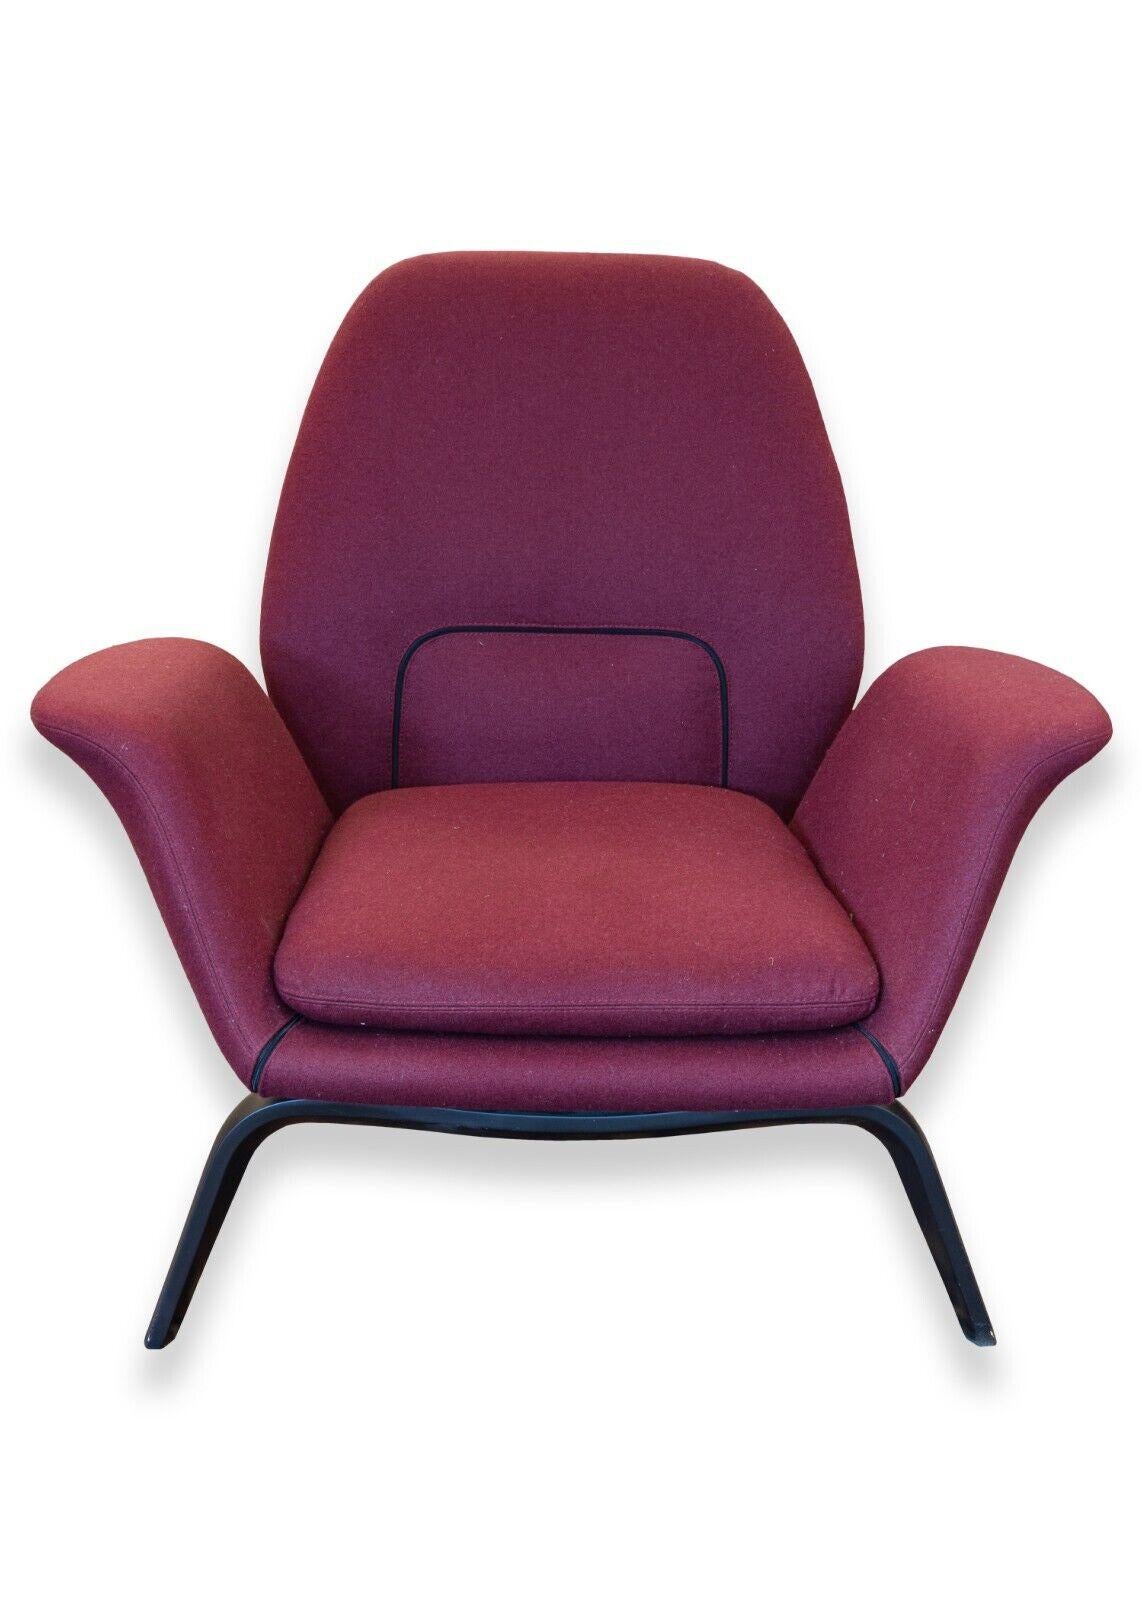 A Minotti Gilliam armchair. A delightful armchair from Italian furniture designers Minotti. The Gilliam armchair features a wonderful, playful silhouette. The design showcases curves from every angle of viewing with a very organic feeling. This